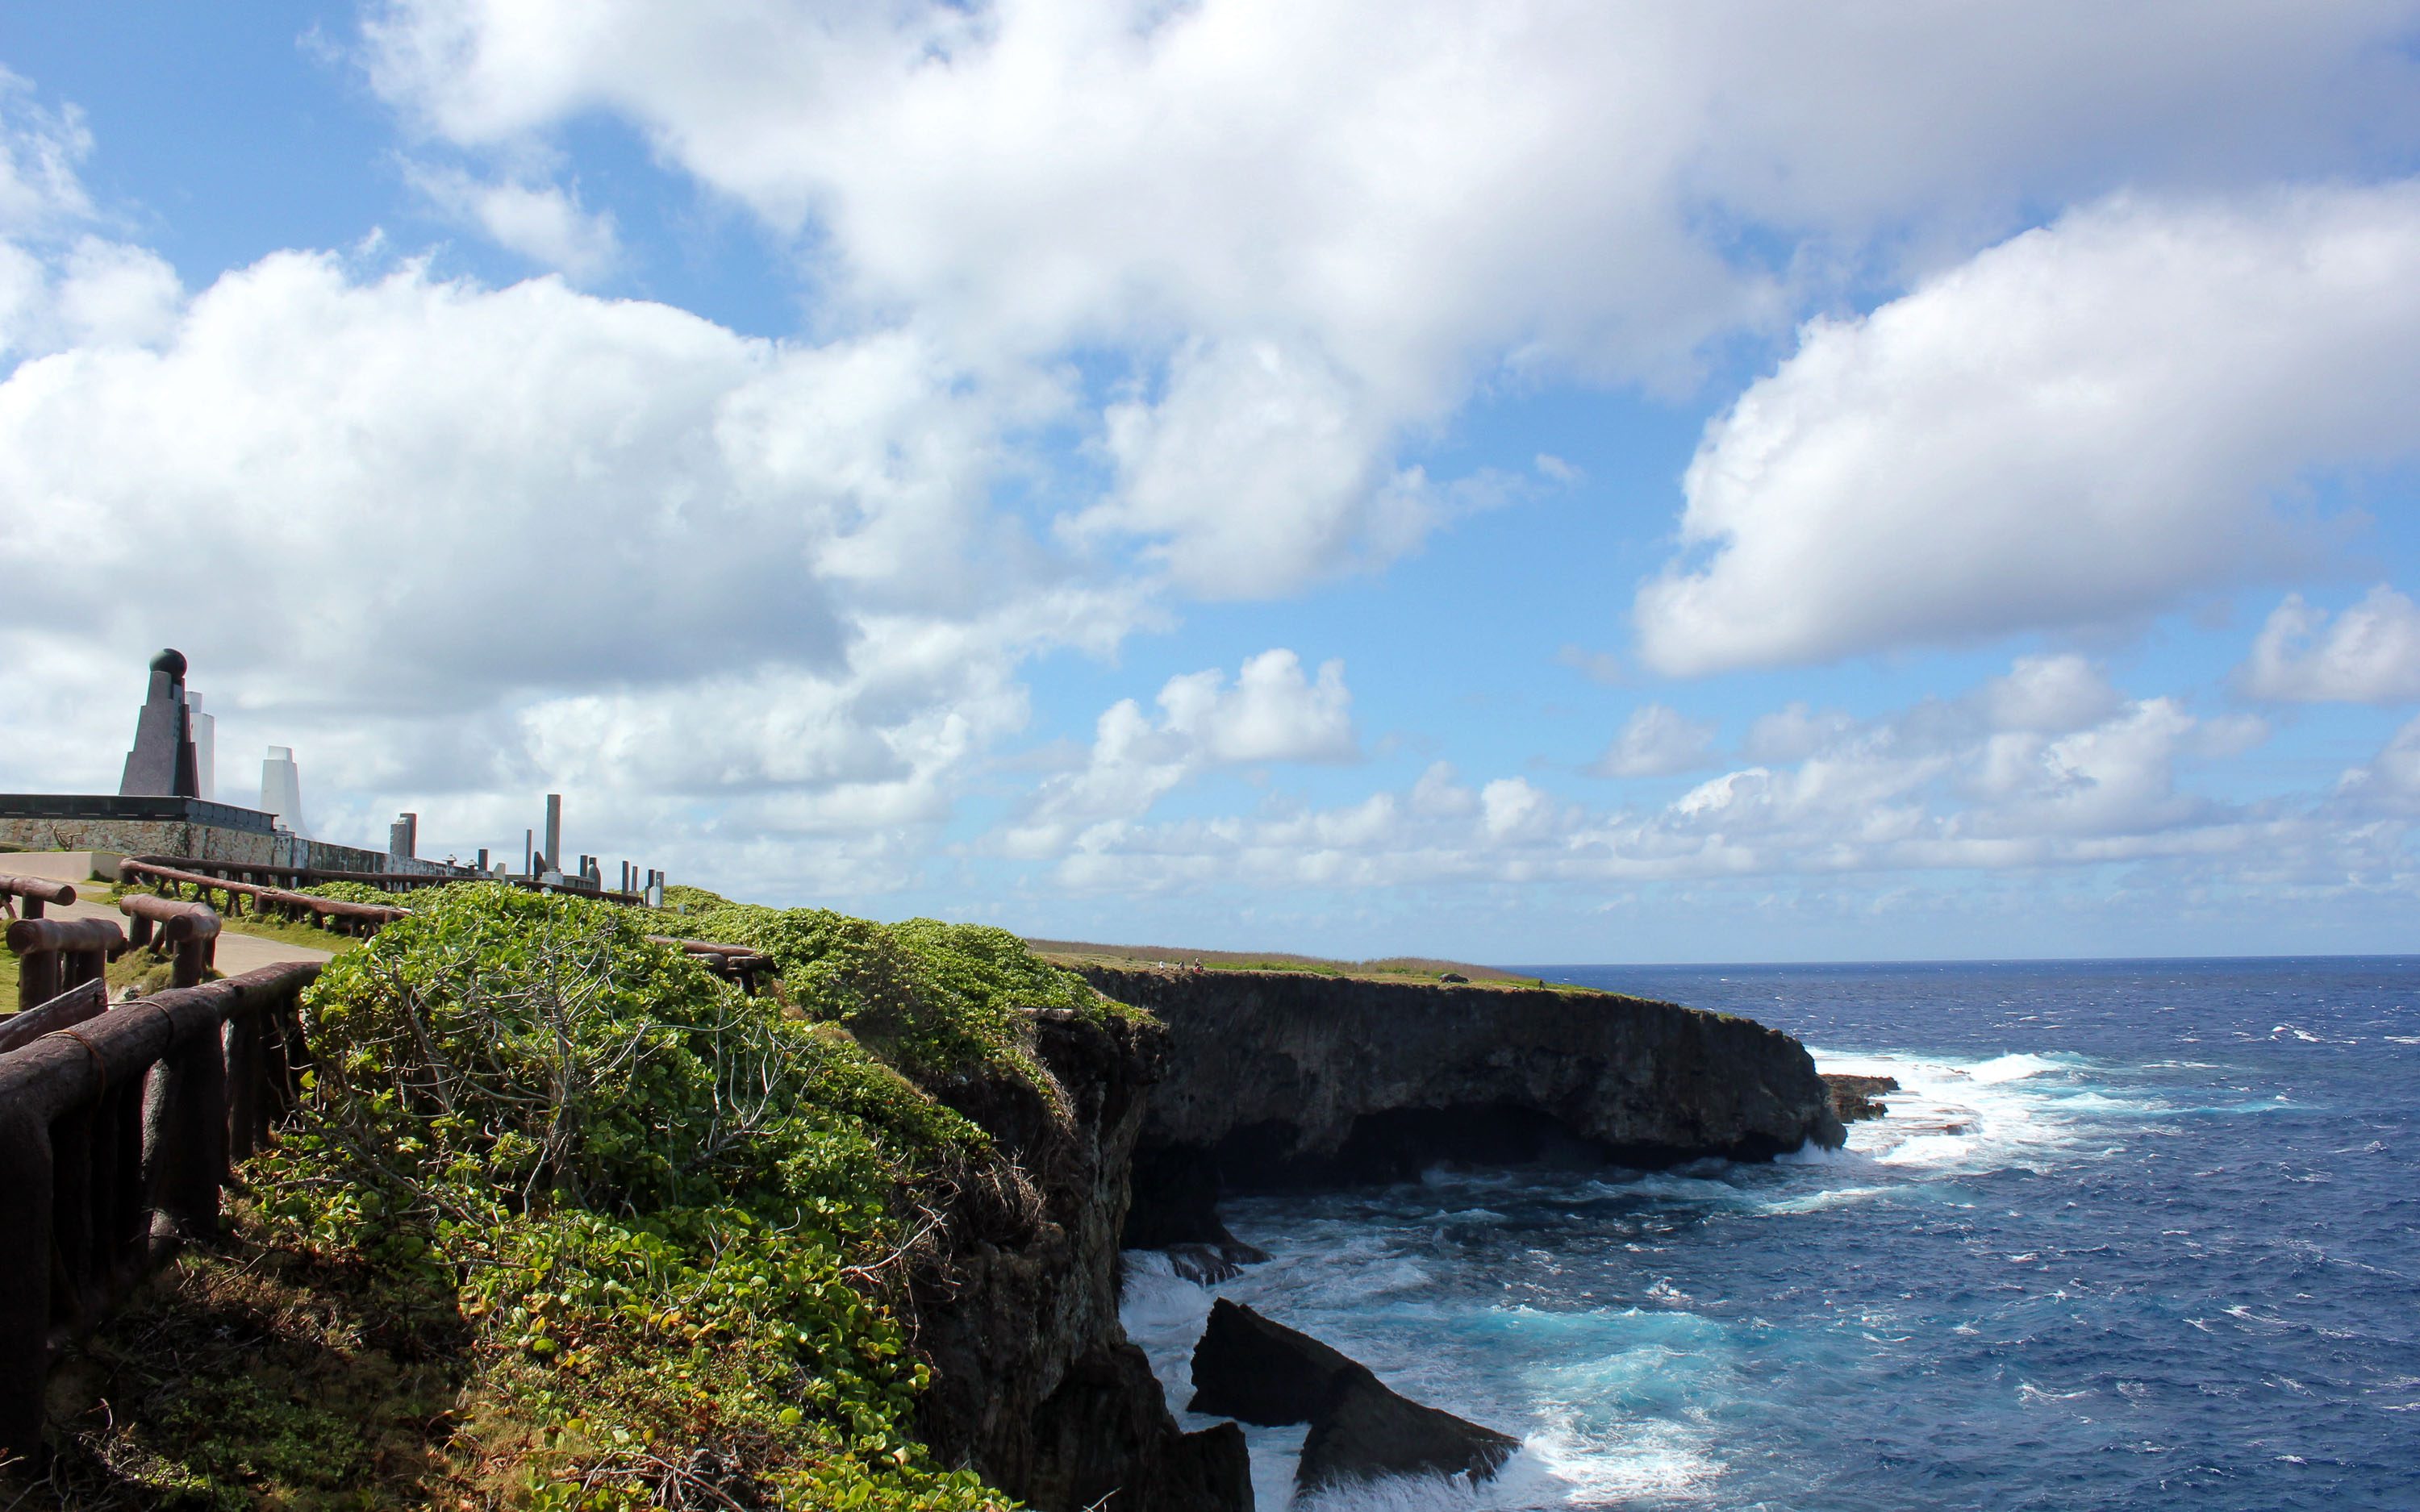 BANZAI CLIFF. Banzai Cliff is known as the location where Japanese soldiers committed suicide during World War II to escape capture by the Americans. Photo courtesy of Marianas Visitors Authority 